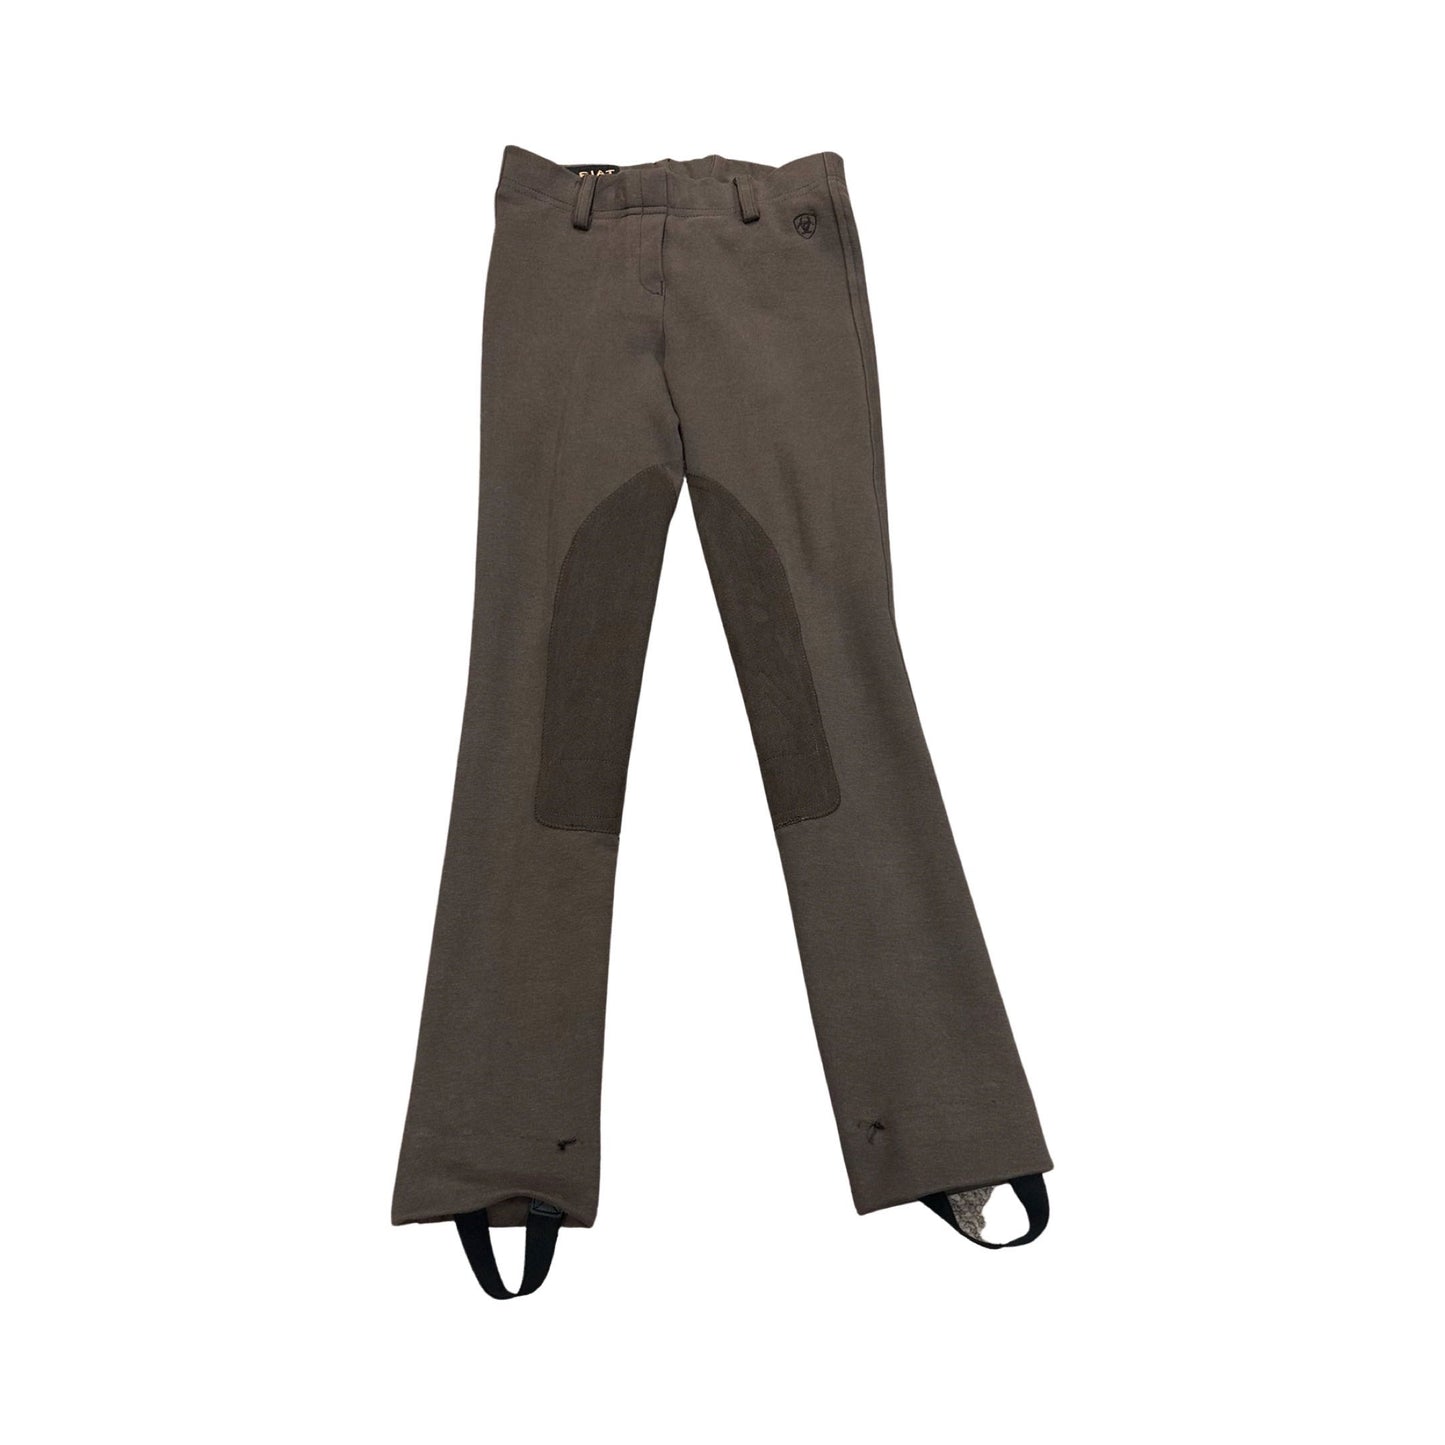 Breeches Ariat Youth sz 10 Brown